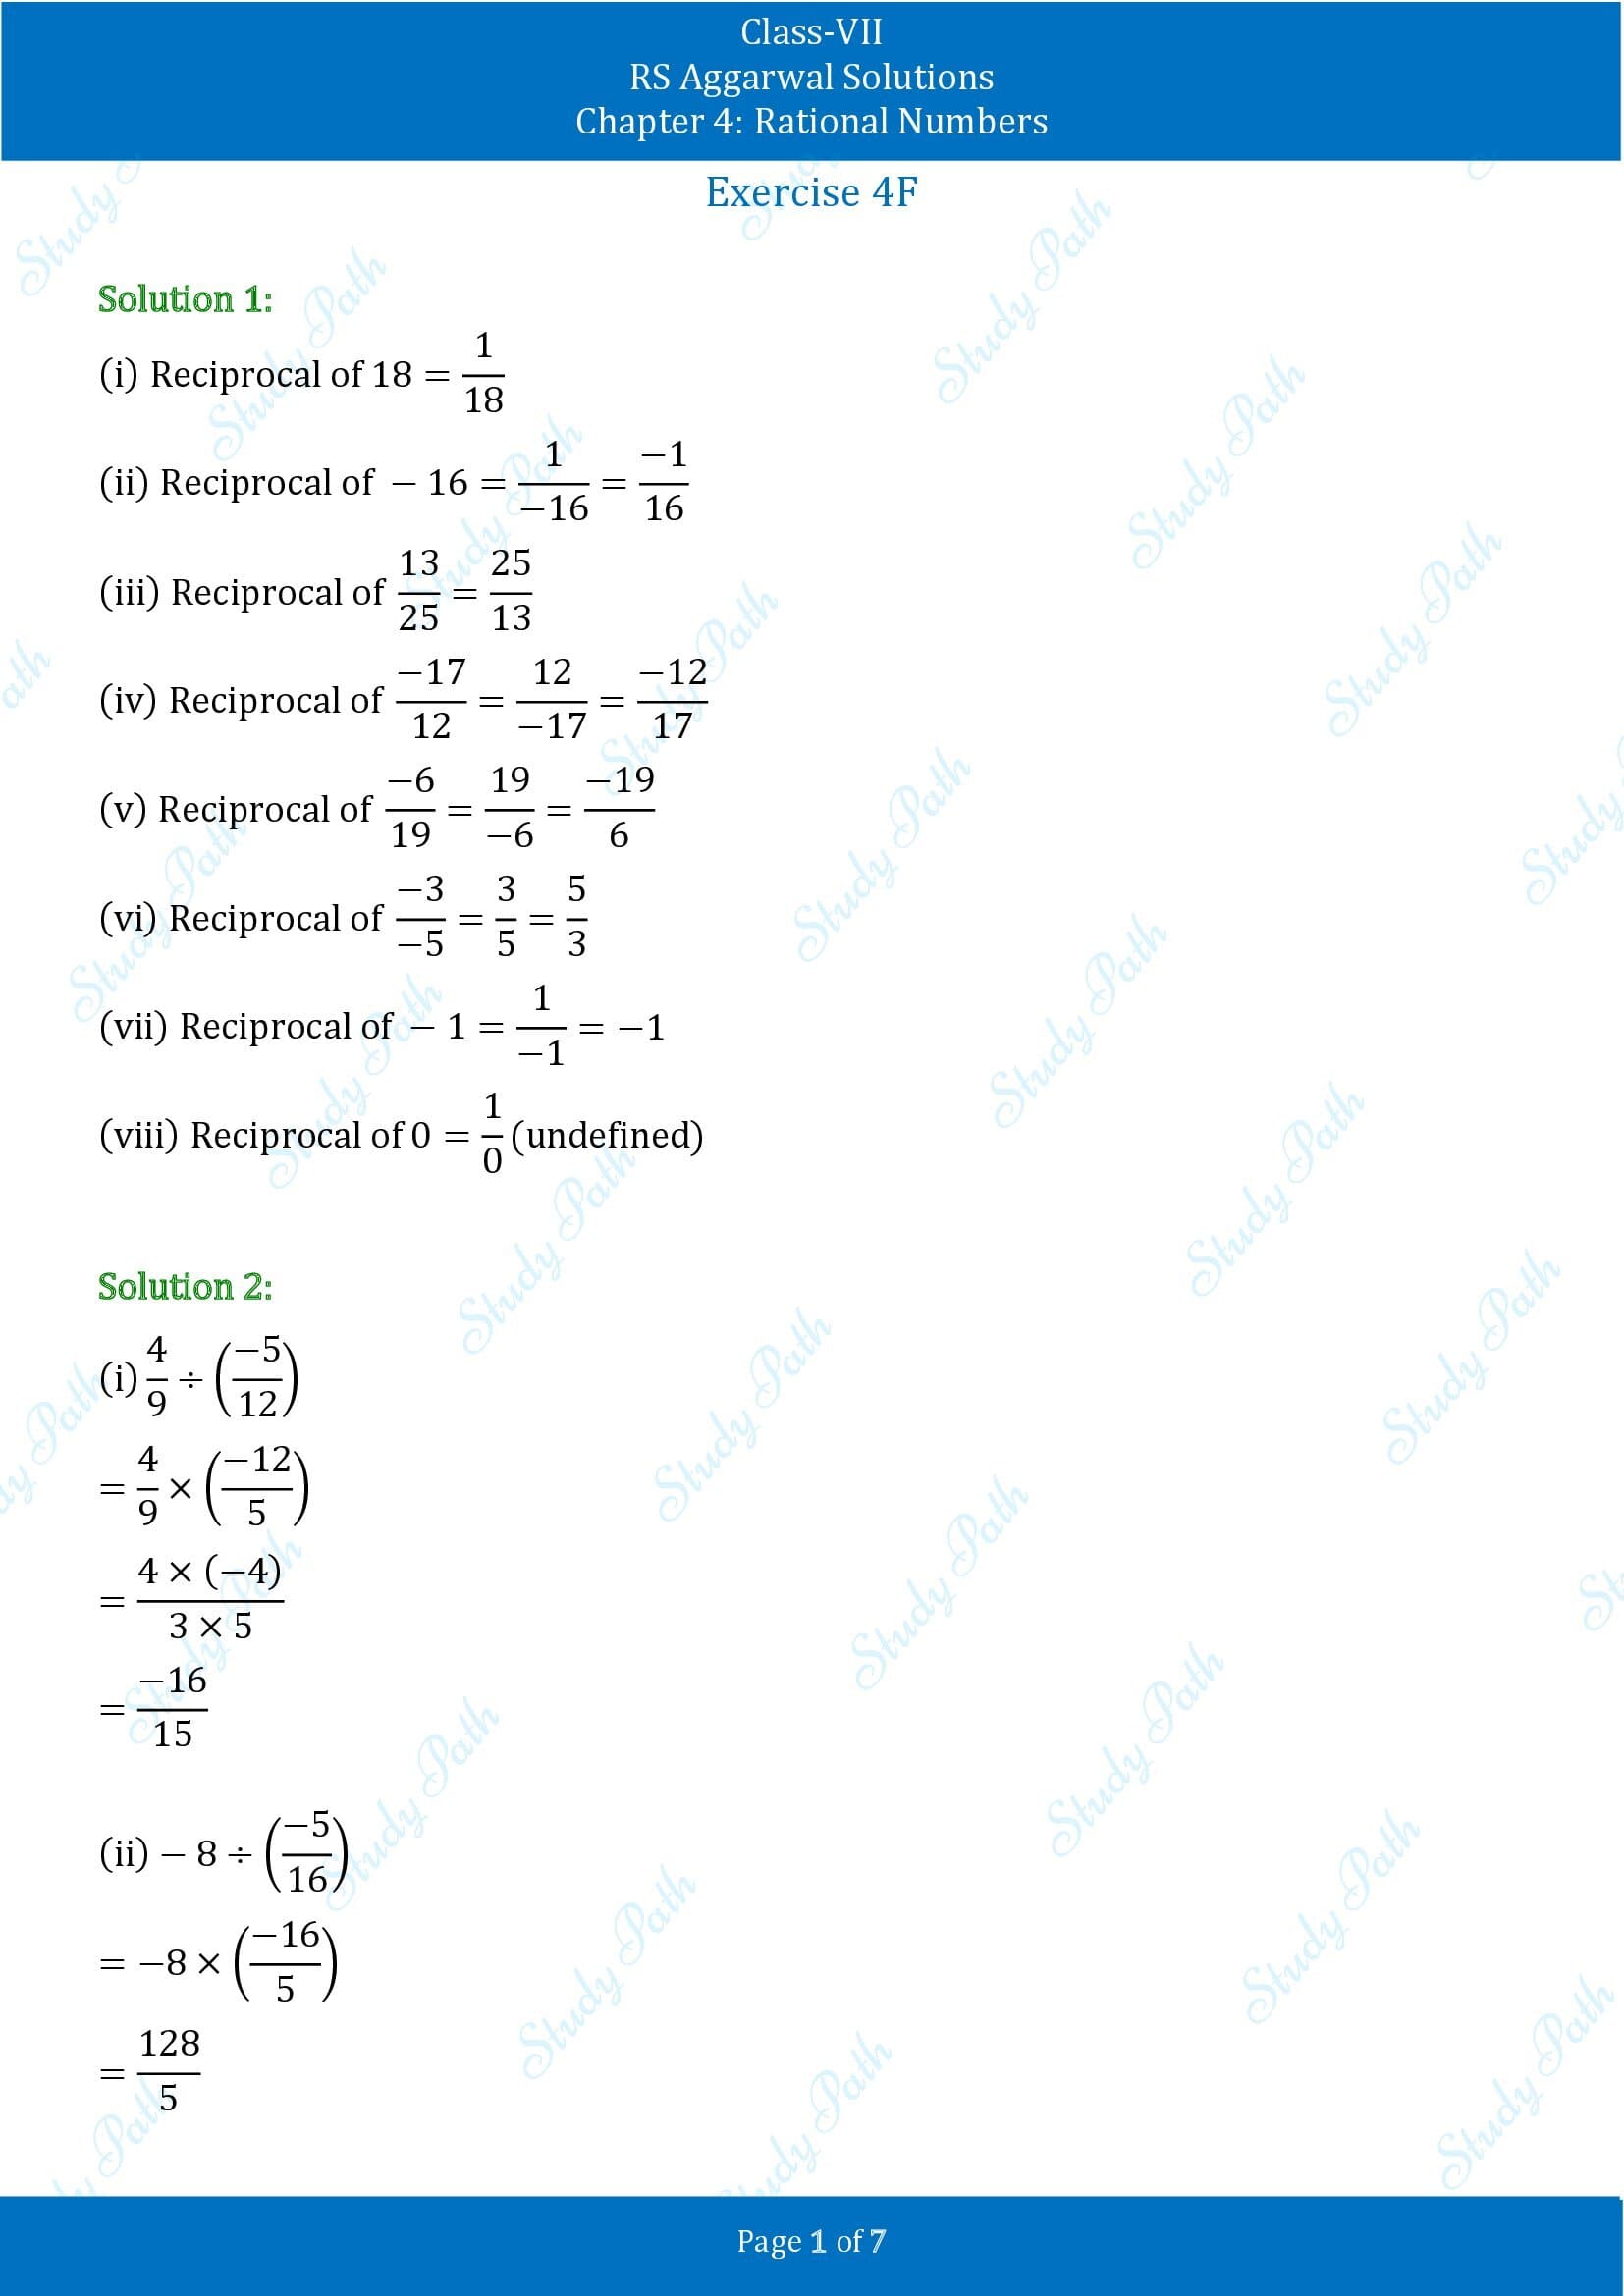 RS Aggarwal Solutions Class 7 Chapter 4 Rational Numbers Exercise 4F 00001